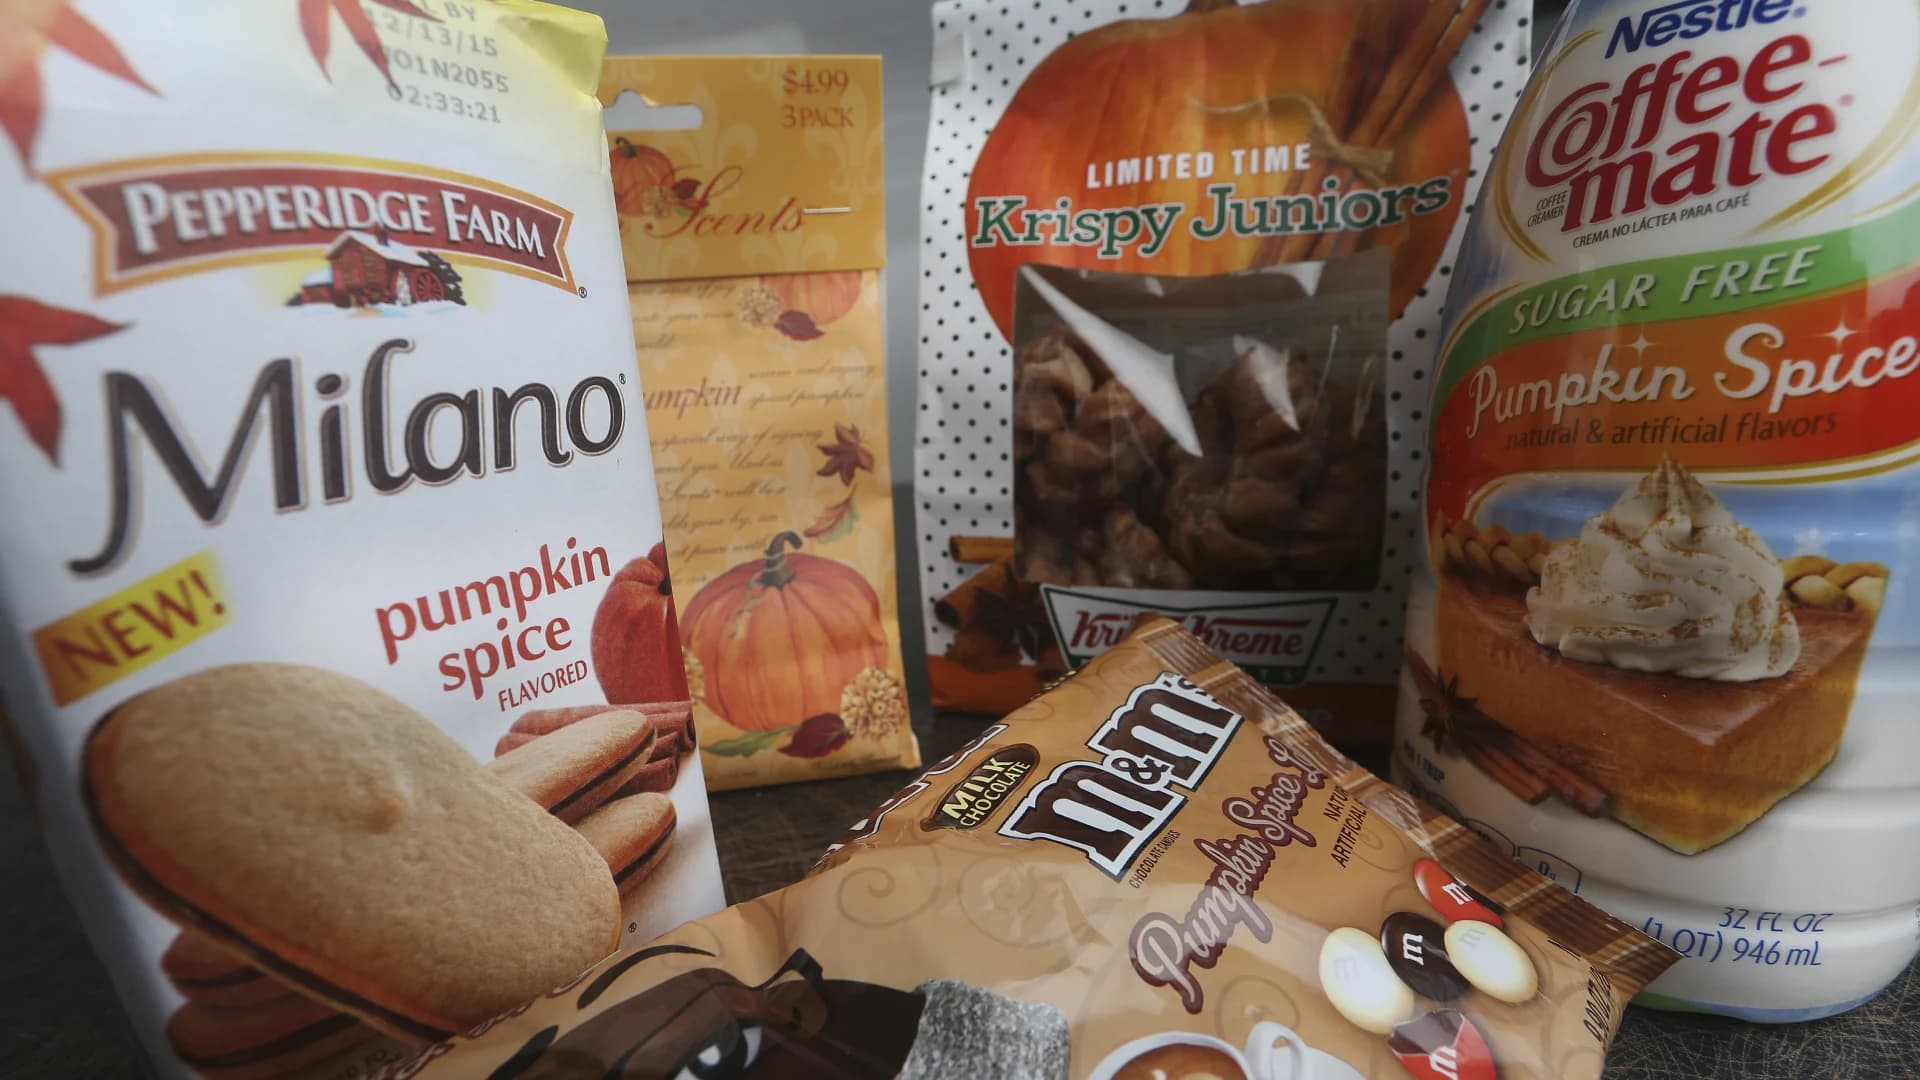 Pumpkin spice is as popular as ever on social media, study finds